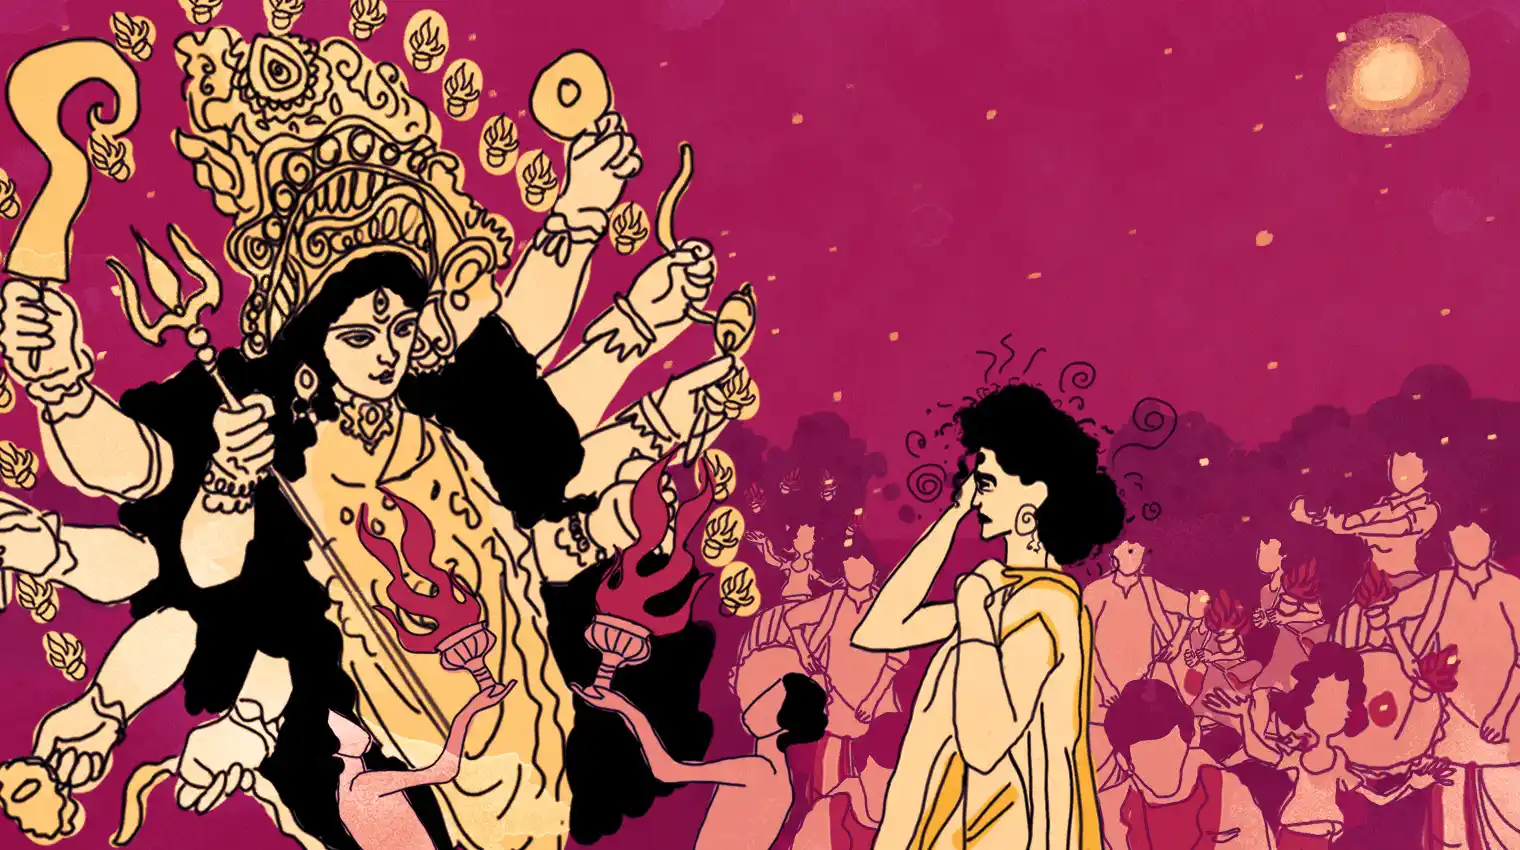 Kolkata's Durga Pujo: The Best of Times, The Worst of Times